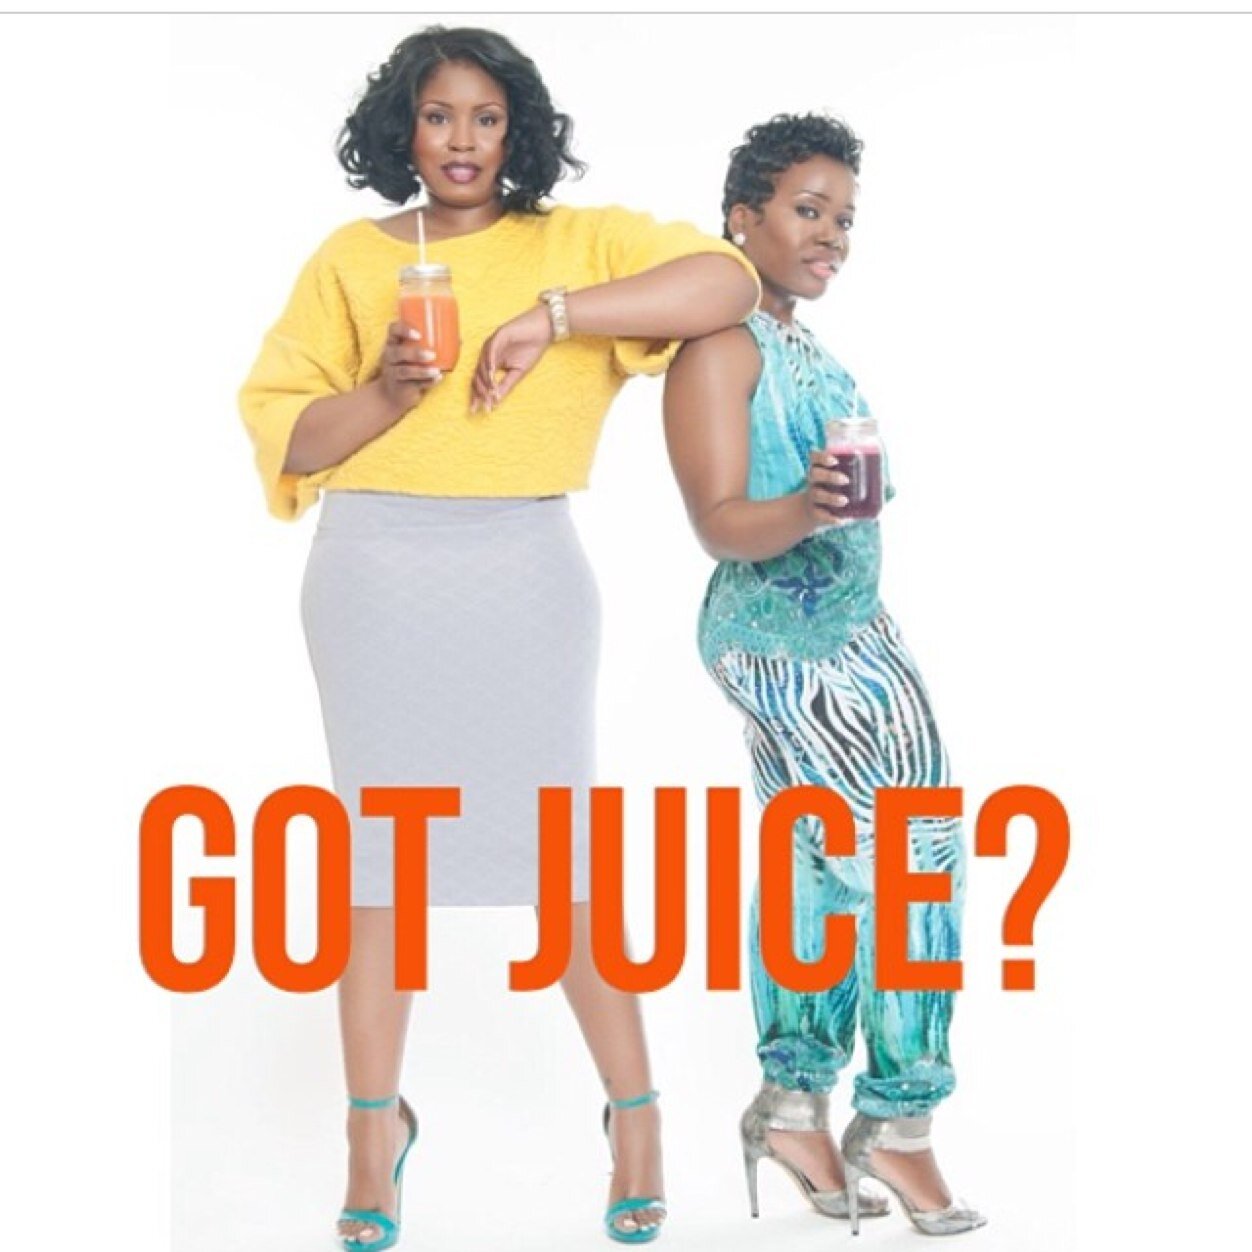 Eevi Juices focuses on promoting health and fitness through juicing. We will conveniently provide freshly made juices, smoothies, and fruit infused waters.